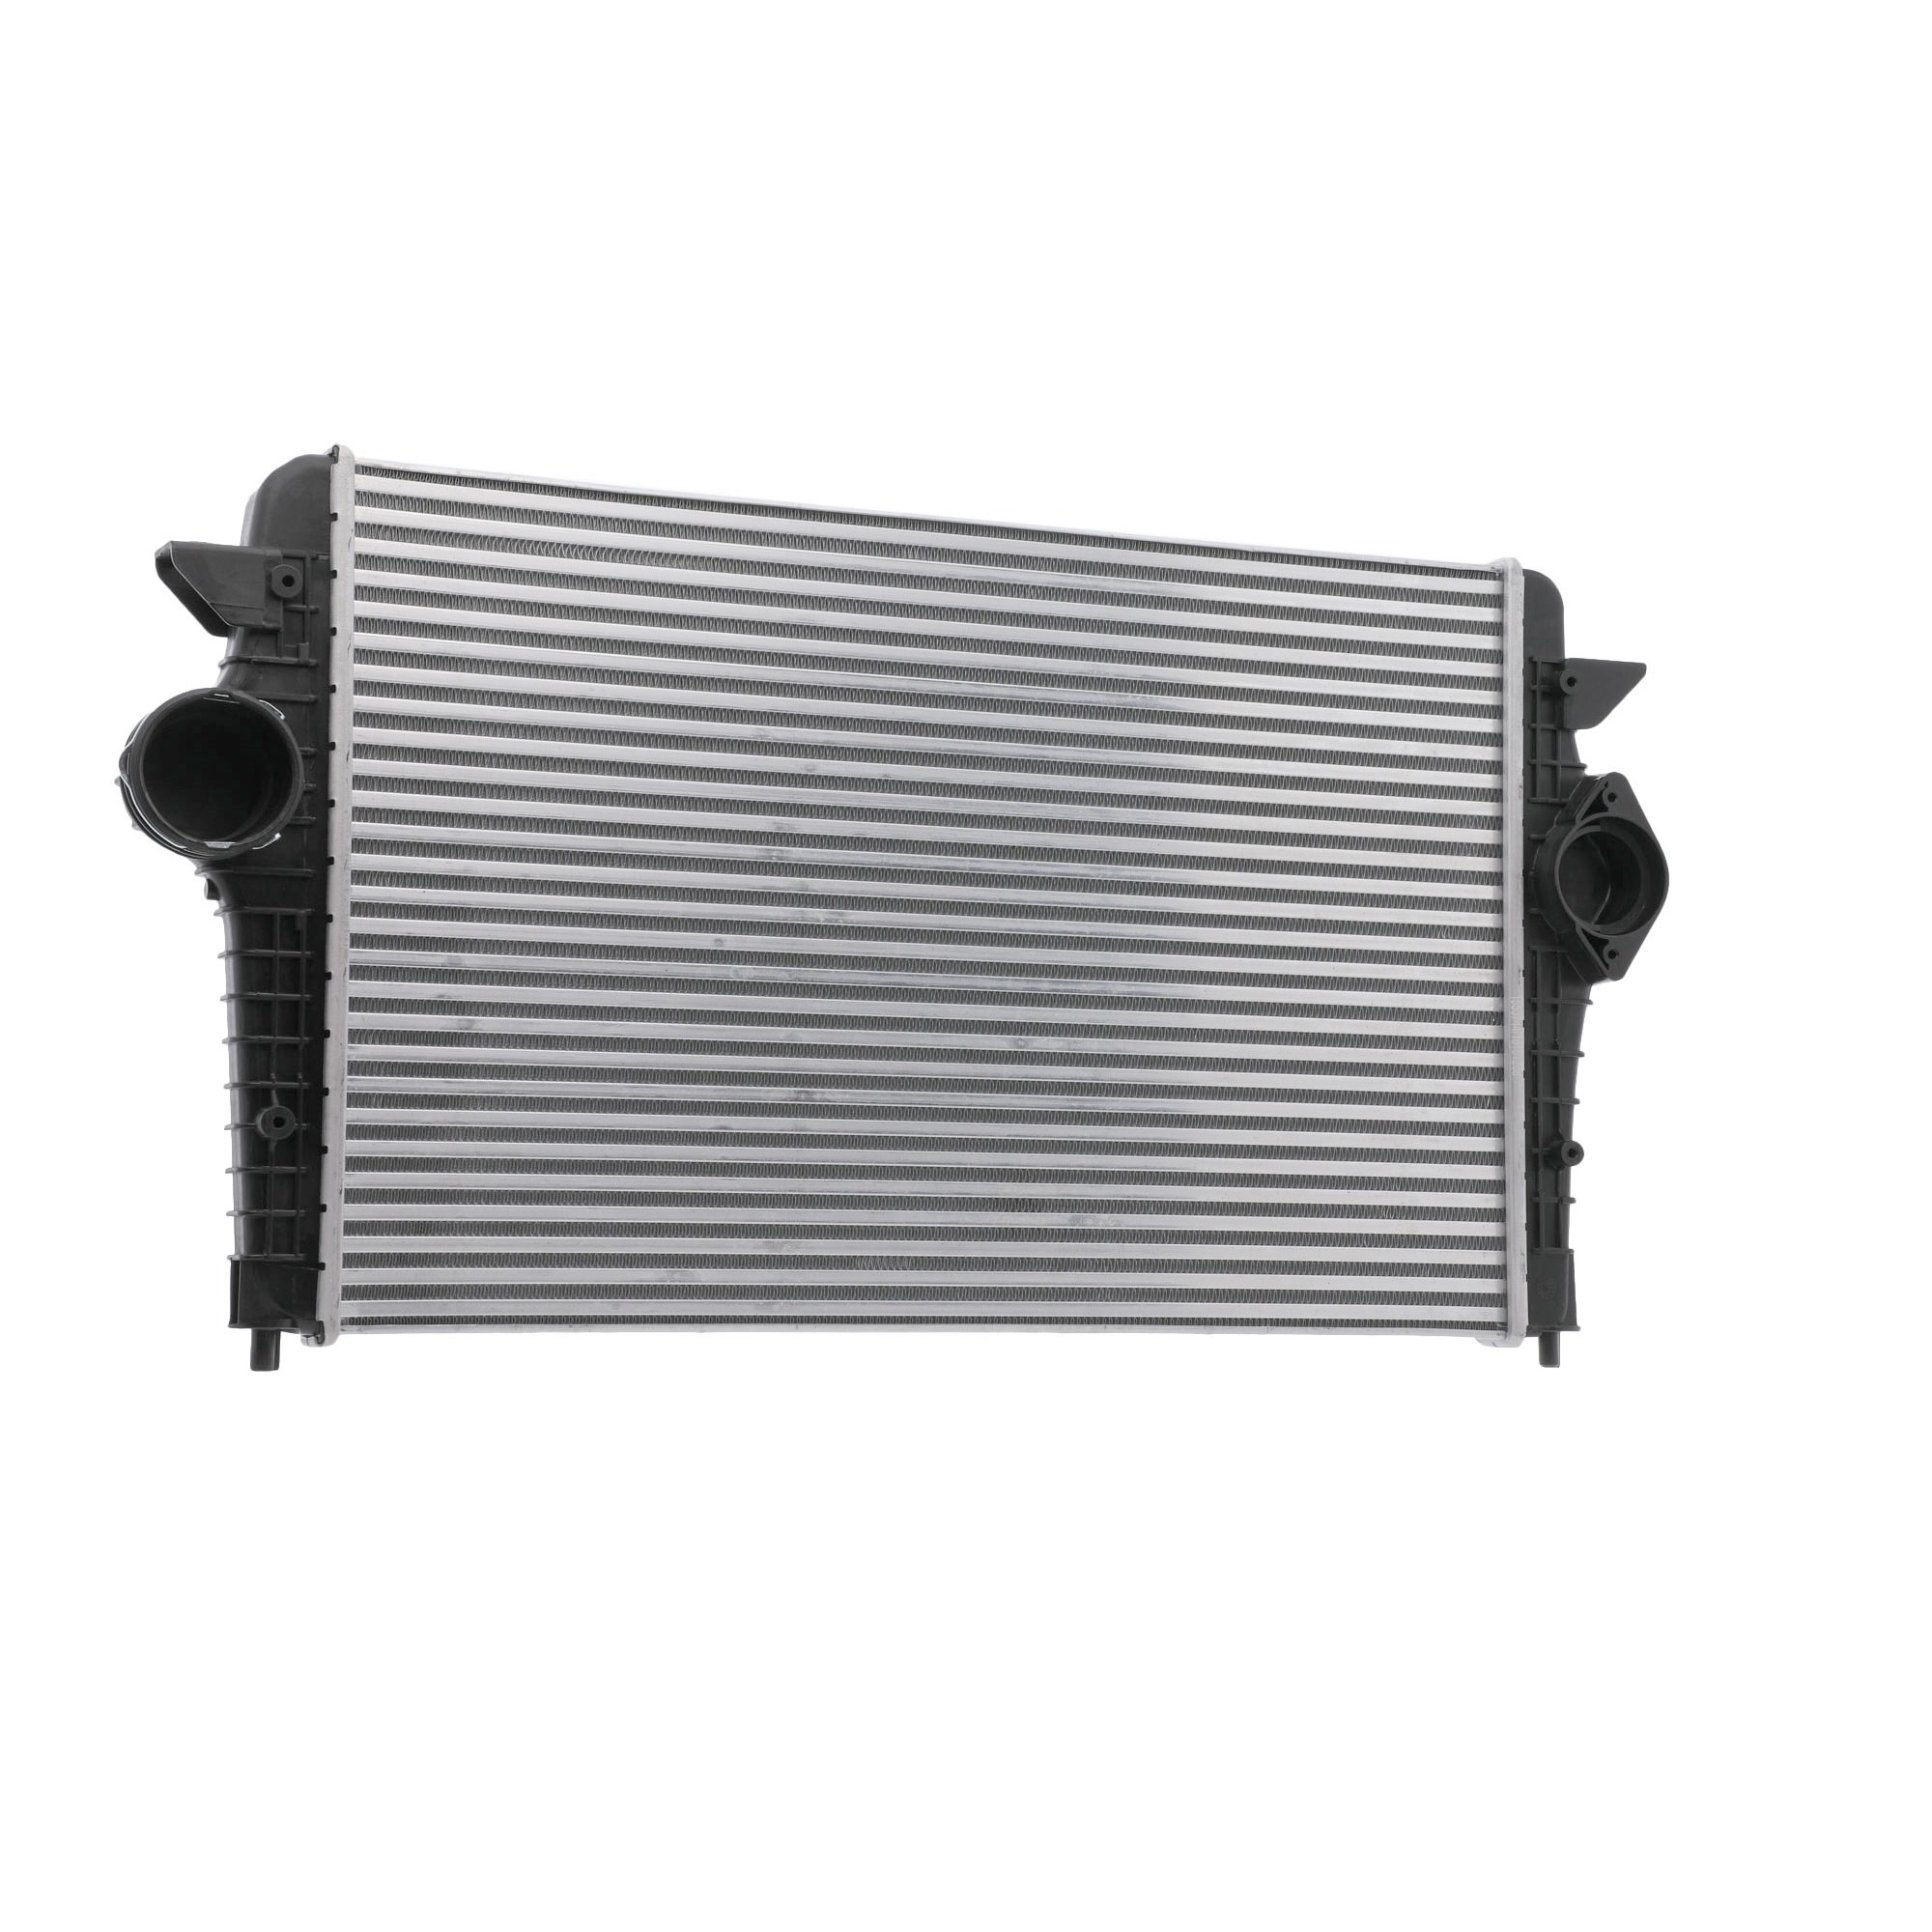 Ford FOCUS Intercooler charger 16151208 RIDEX 468I0328 online buy